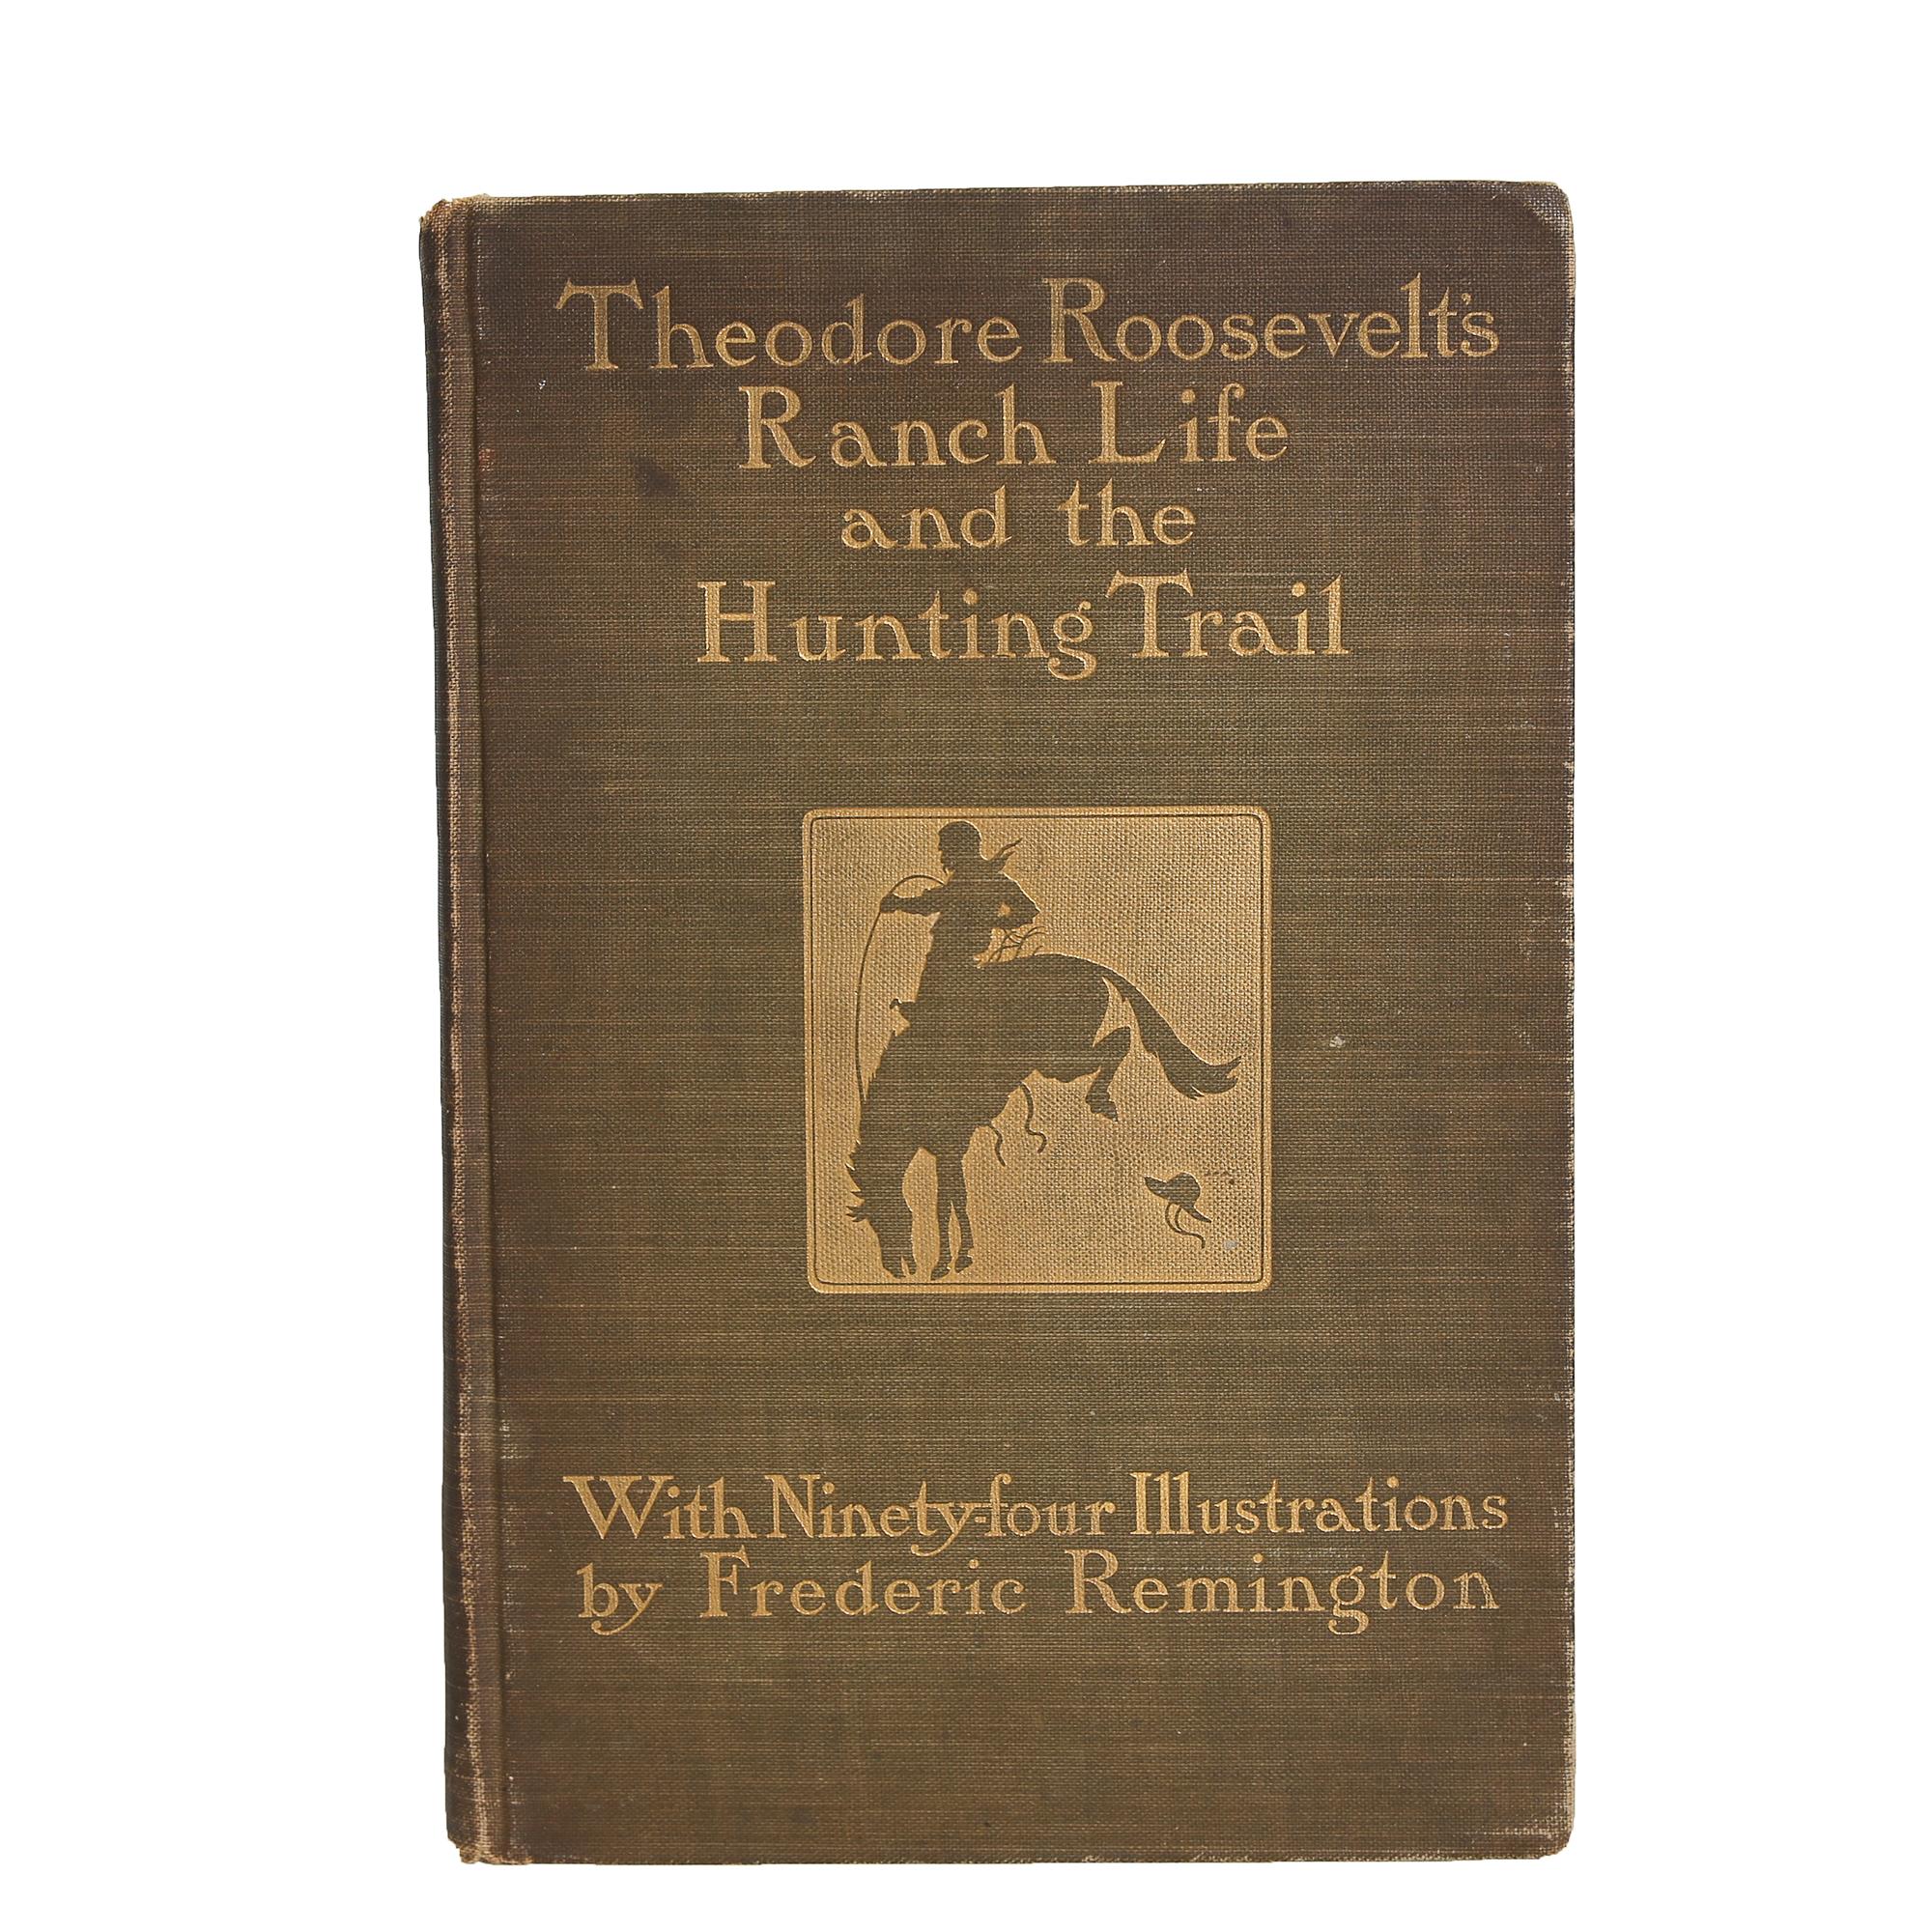 Roosevelt's Ranch Life and the Hunting Trail, Illustrated by Frederic Remington  3